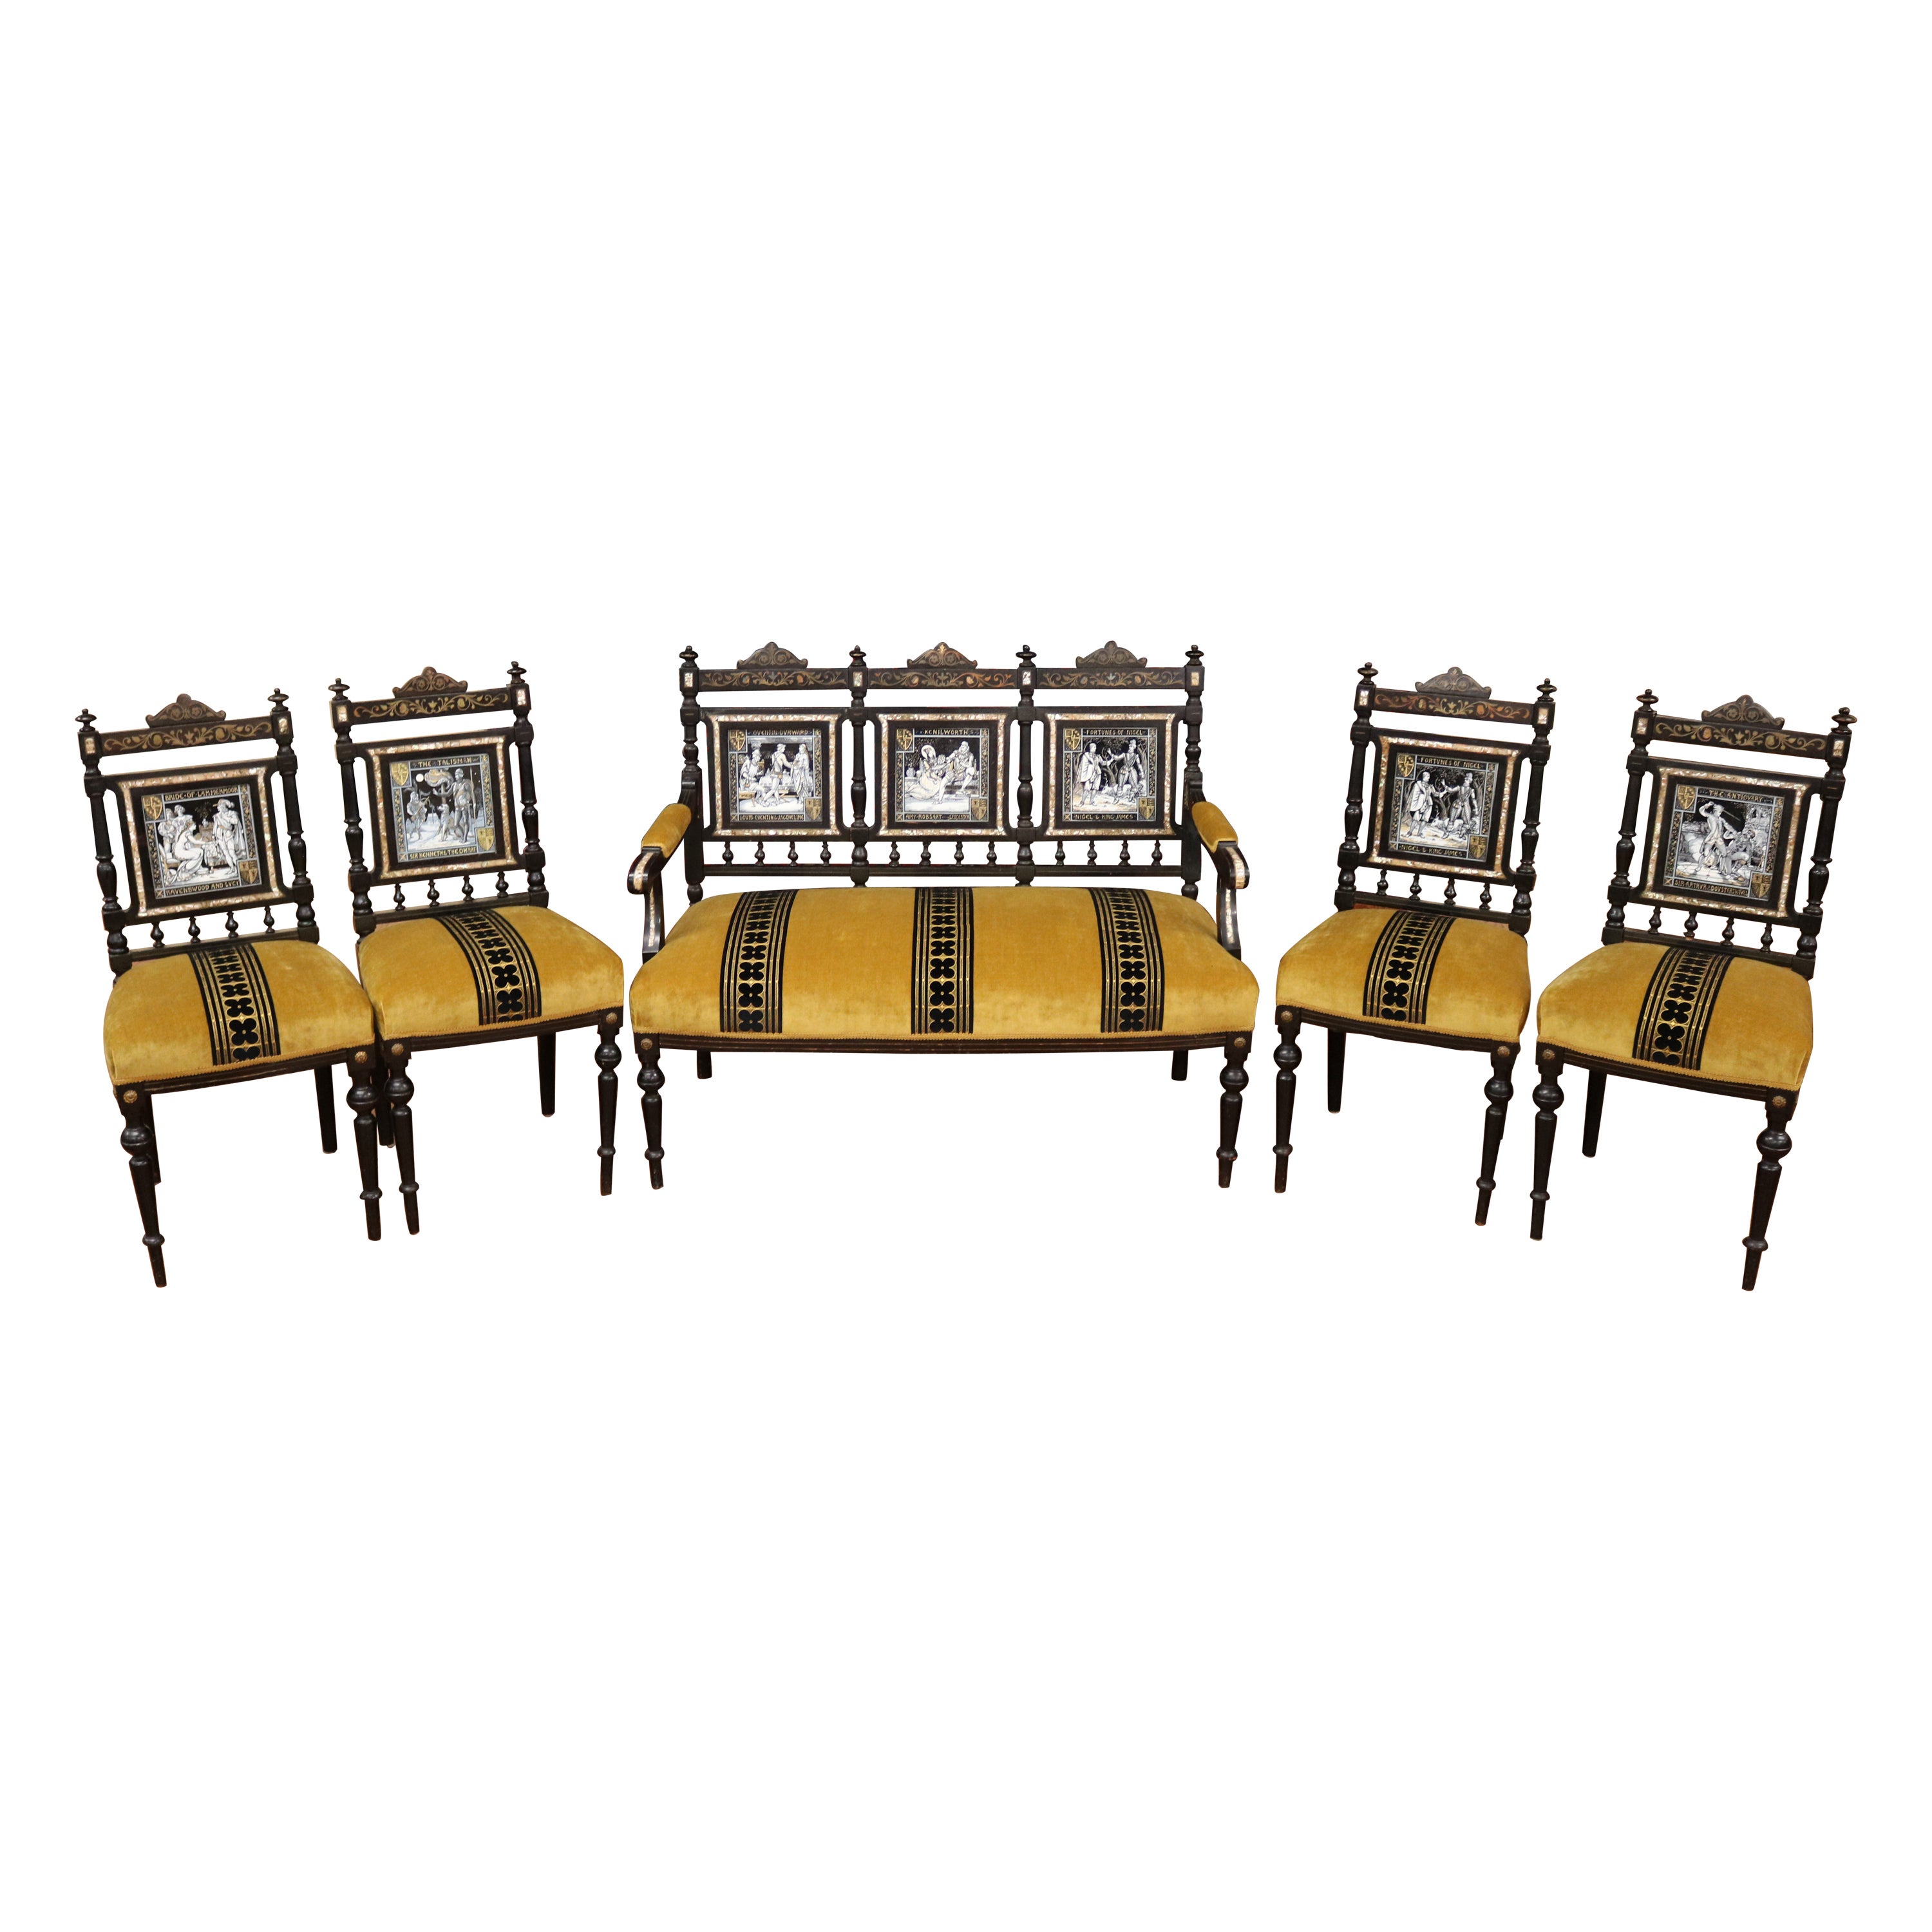 19th Century Aesthetic Victorian Parlor Set Settee & 4 Chairs By John Moyr Smith For Sale